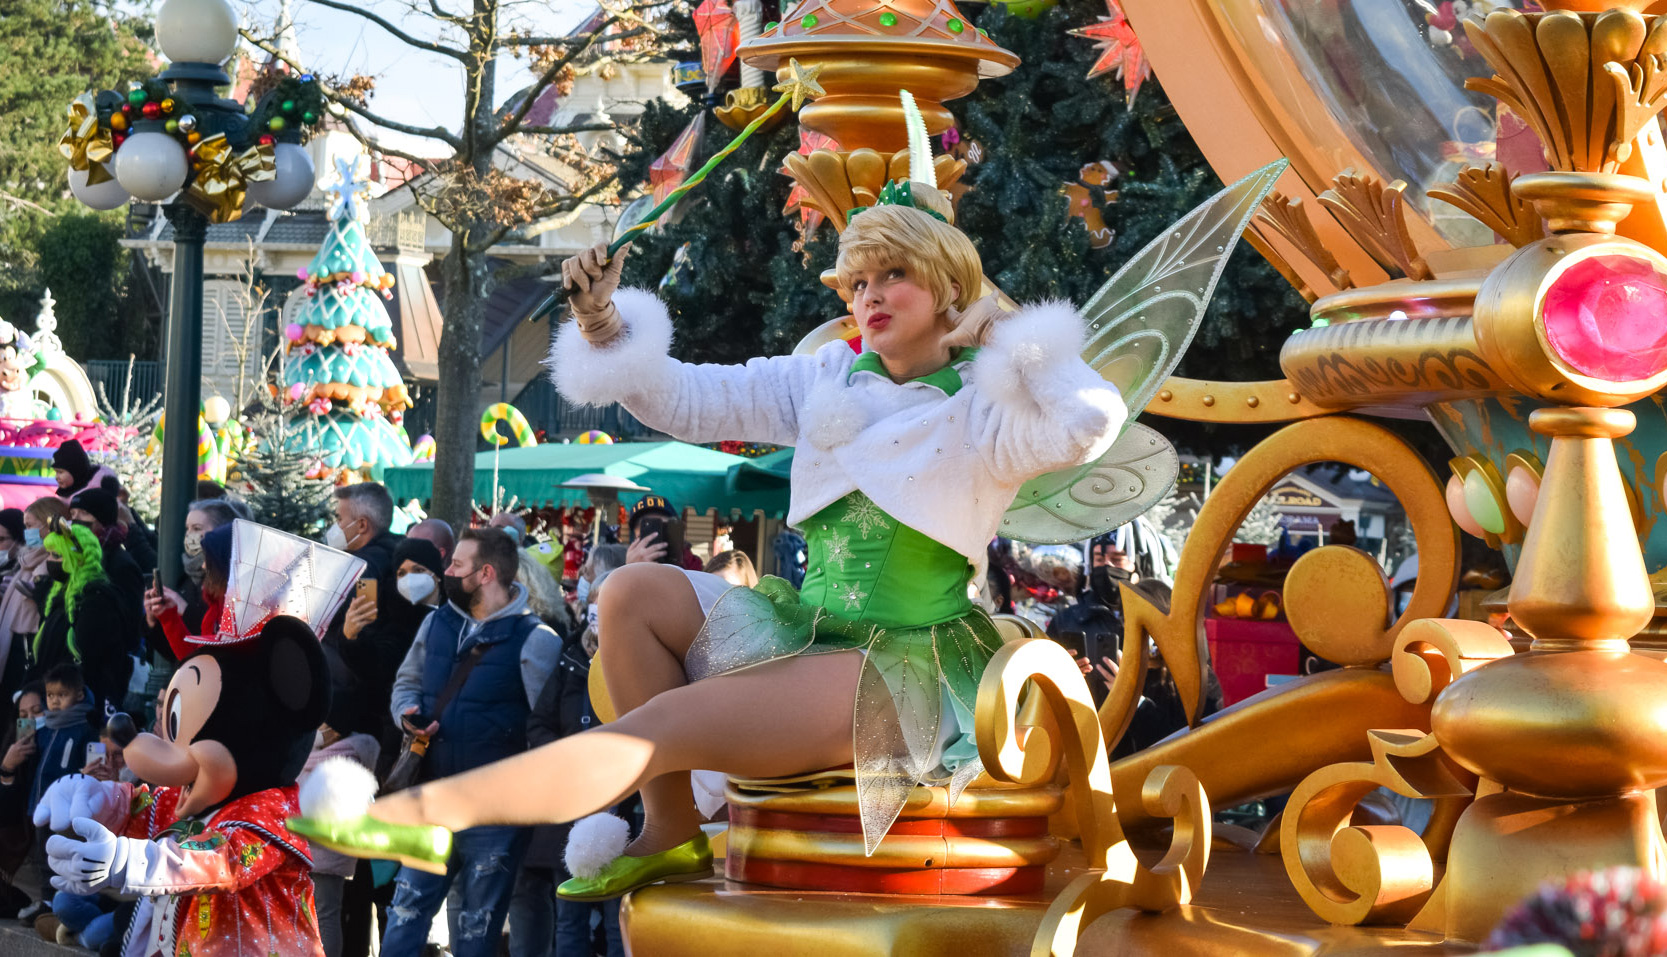 Tinker Bell, Oswald and Ortensia are the Pop Up Surprise Character Meet & Greet at Disneyland Paris!